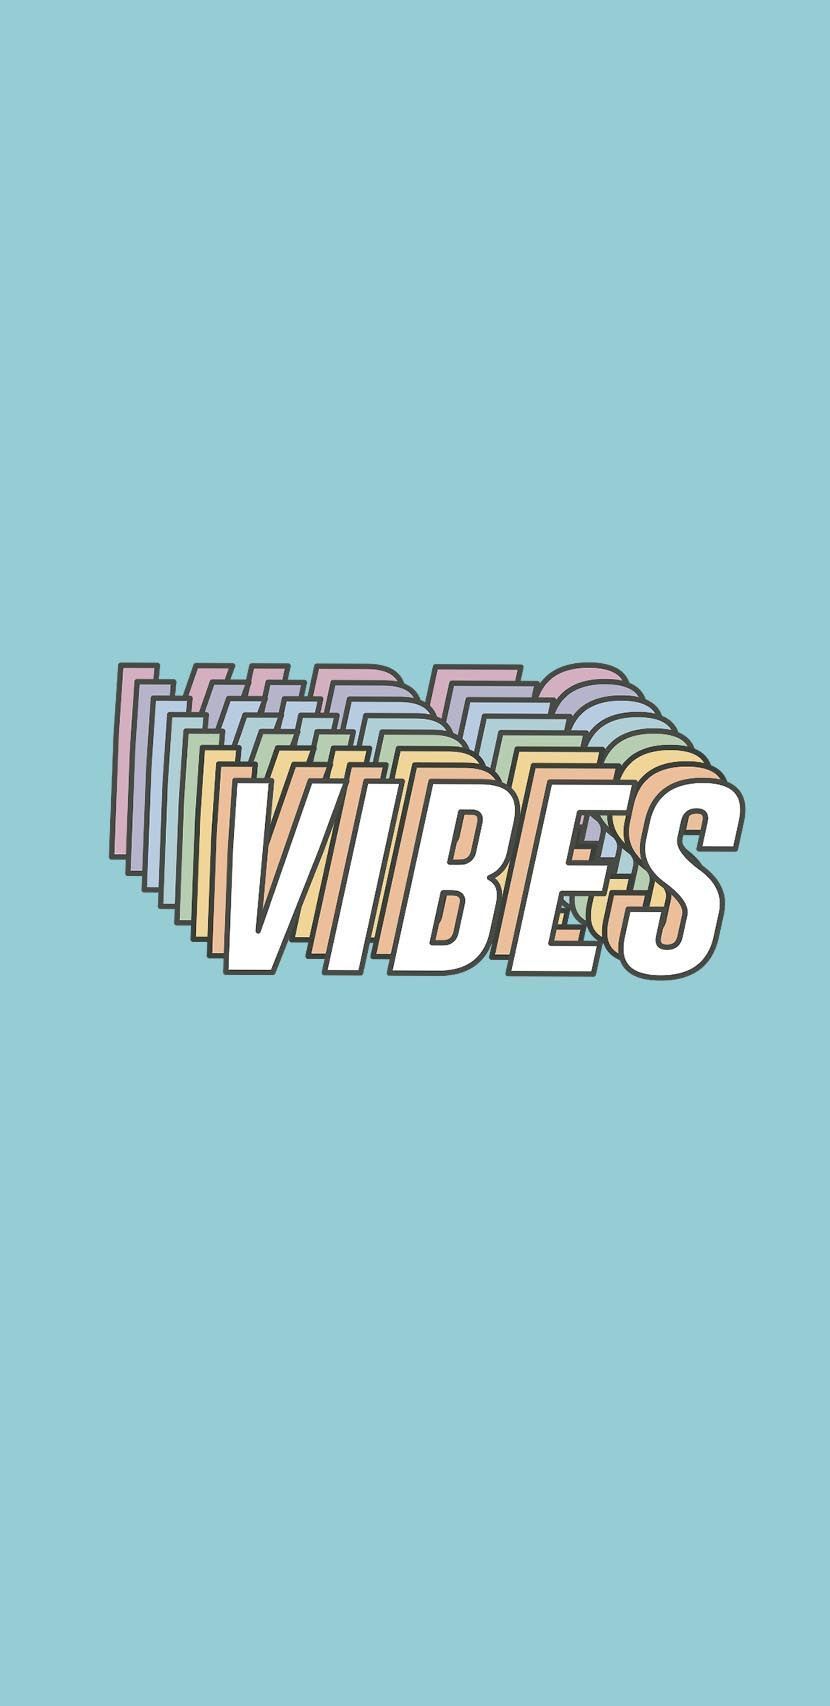 Only Good Vibes On A Lazy Day Wallpaper Beach